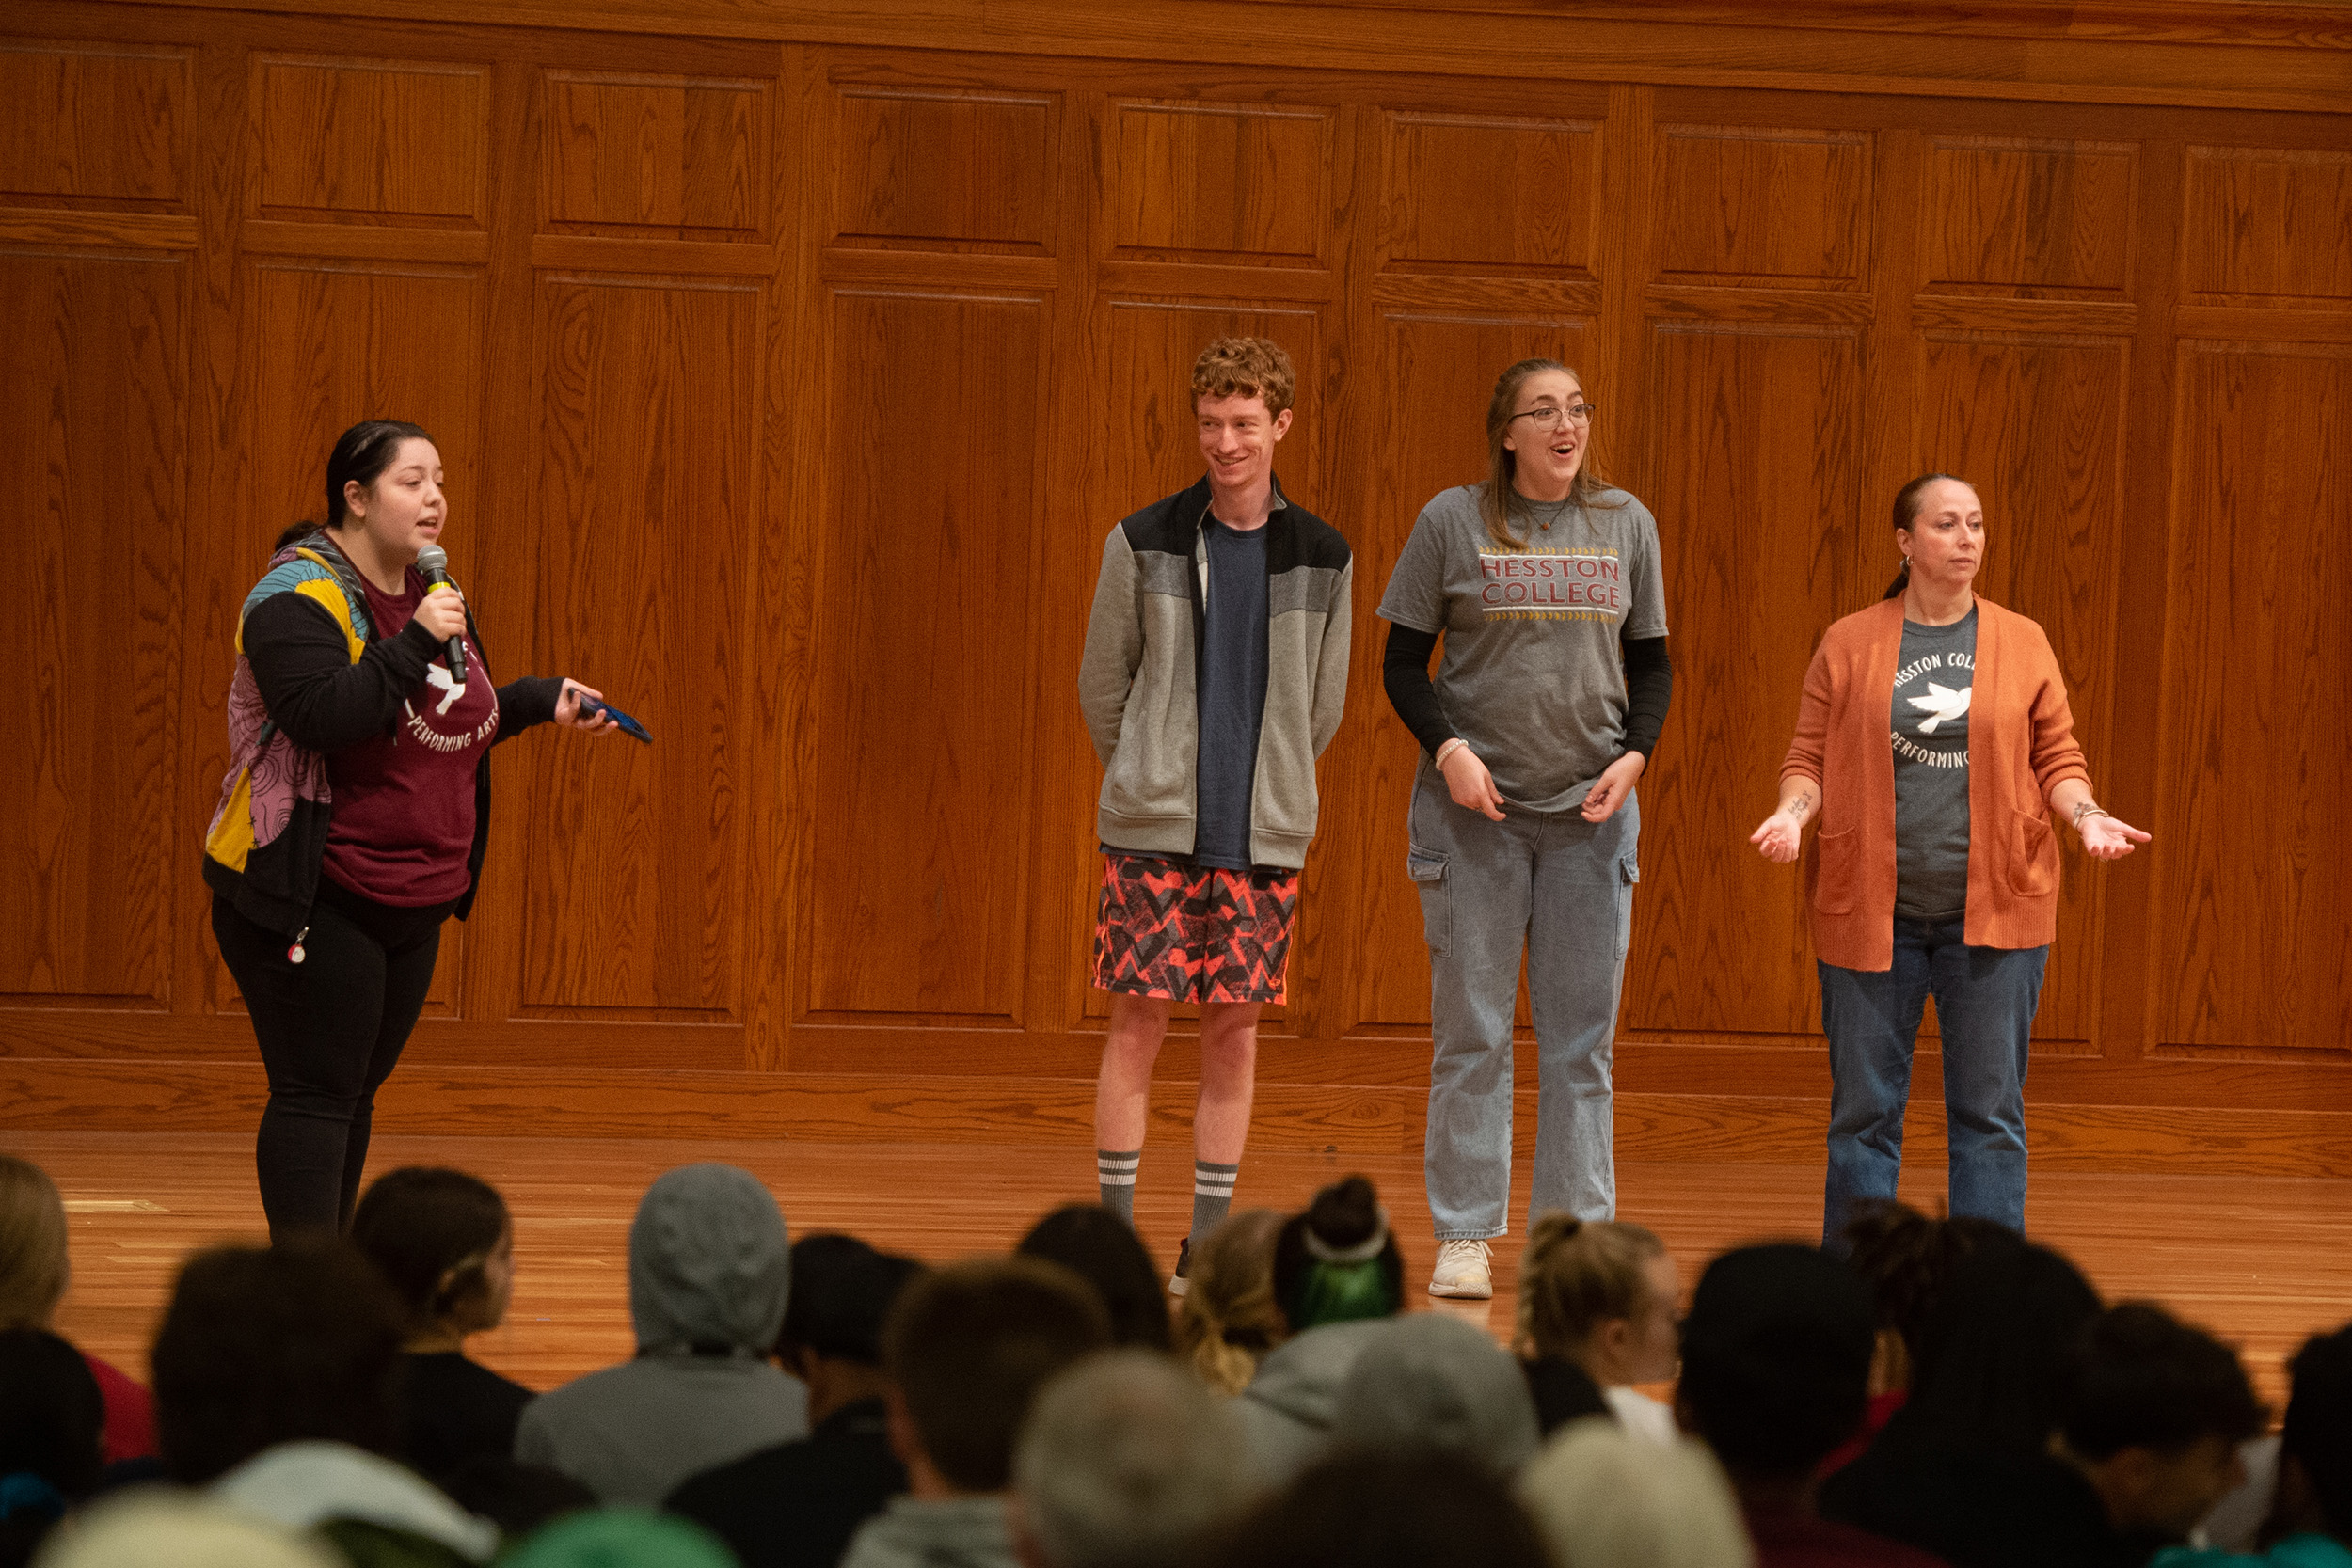 An improv group of theatre students performs at Formation at Hesston College Homecoming 2022